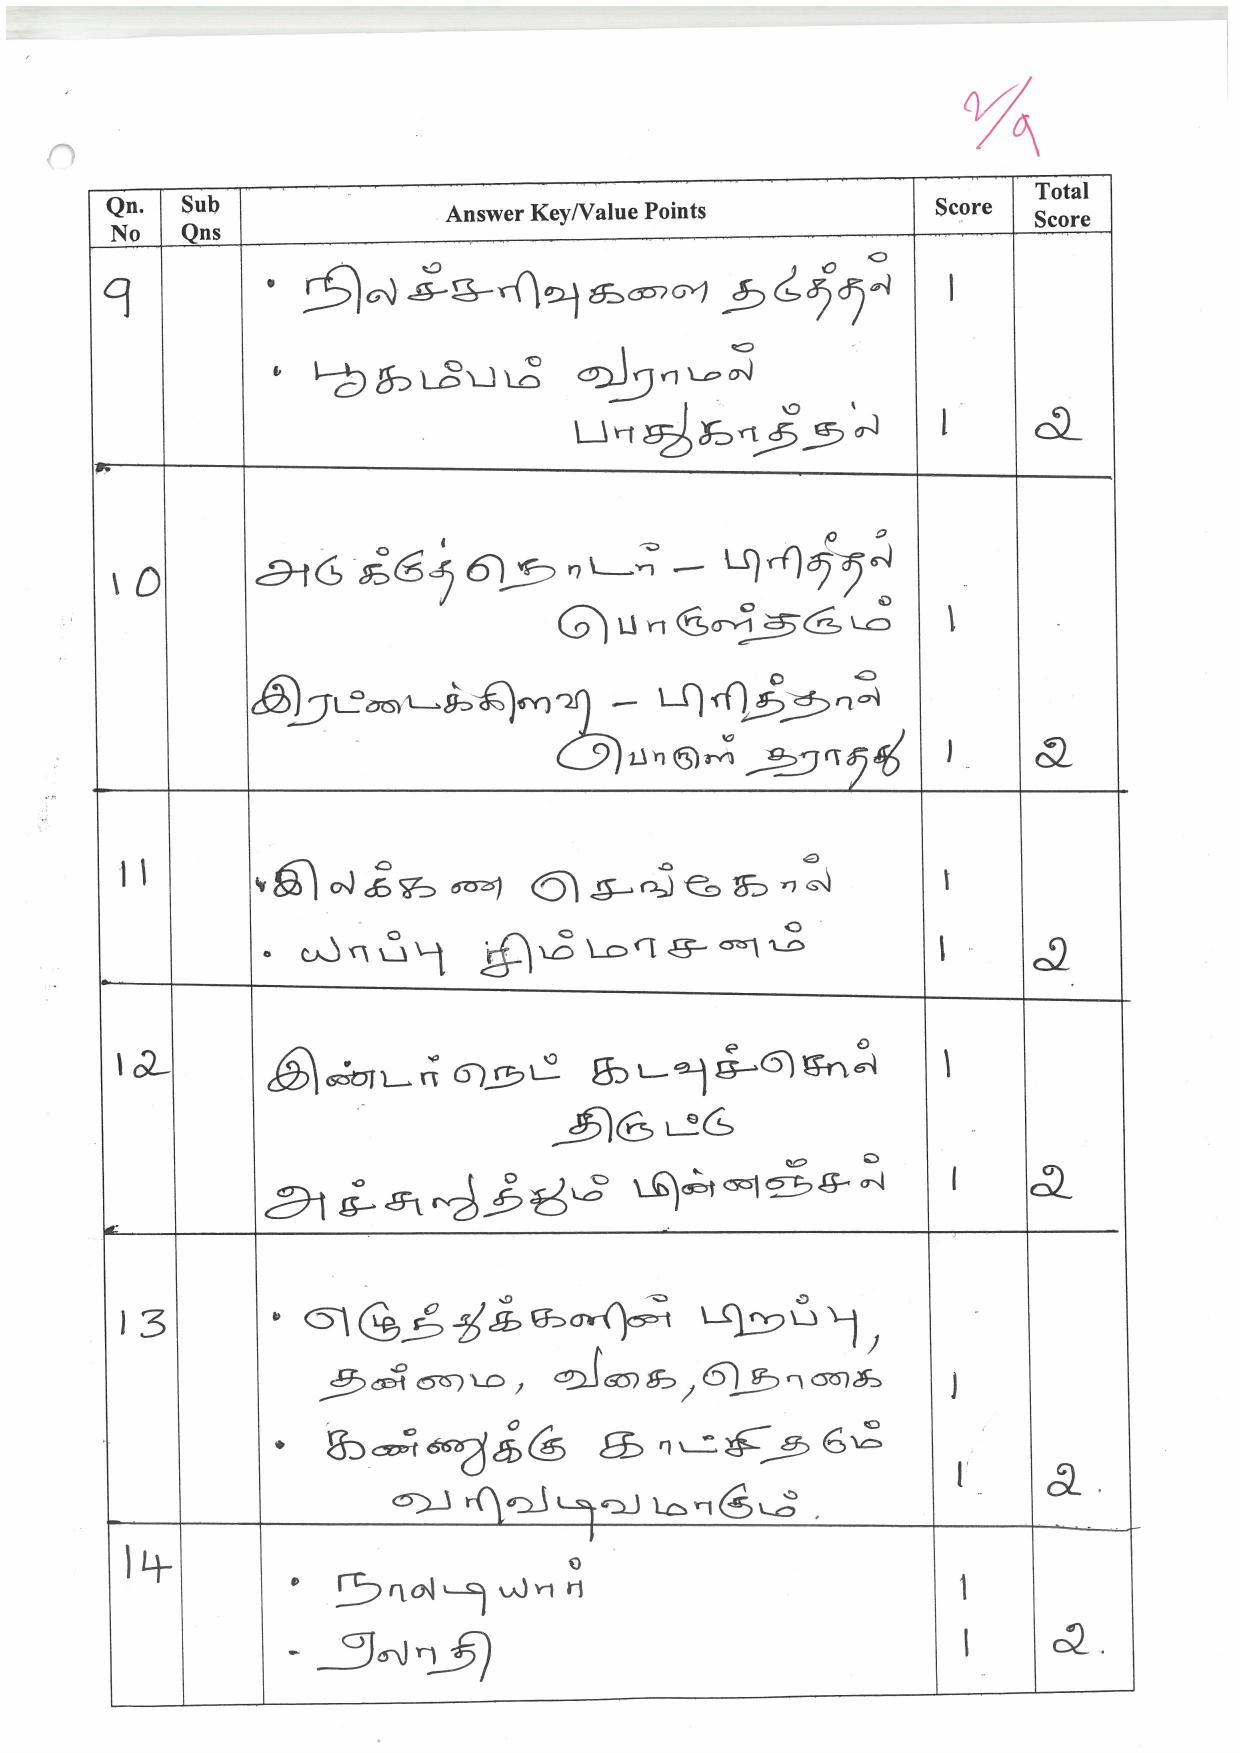 Kerala Plus One (Class 11th) Part-III Tamil-Optional Answer Key 2021 - Page 2